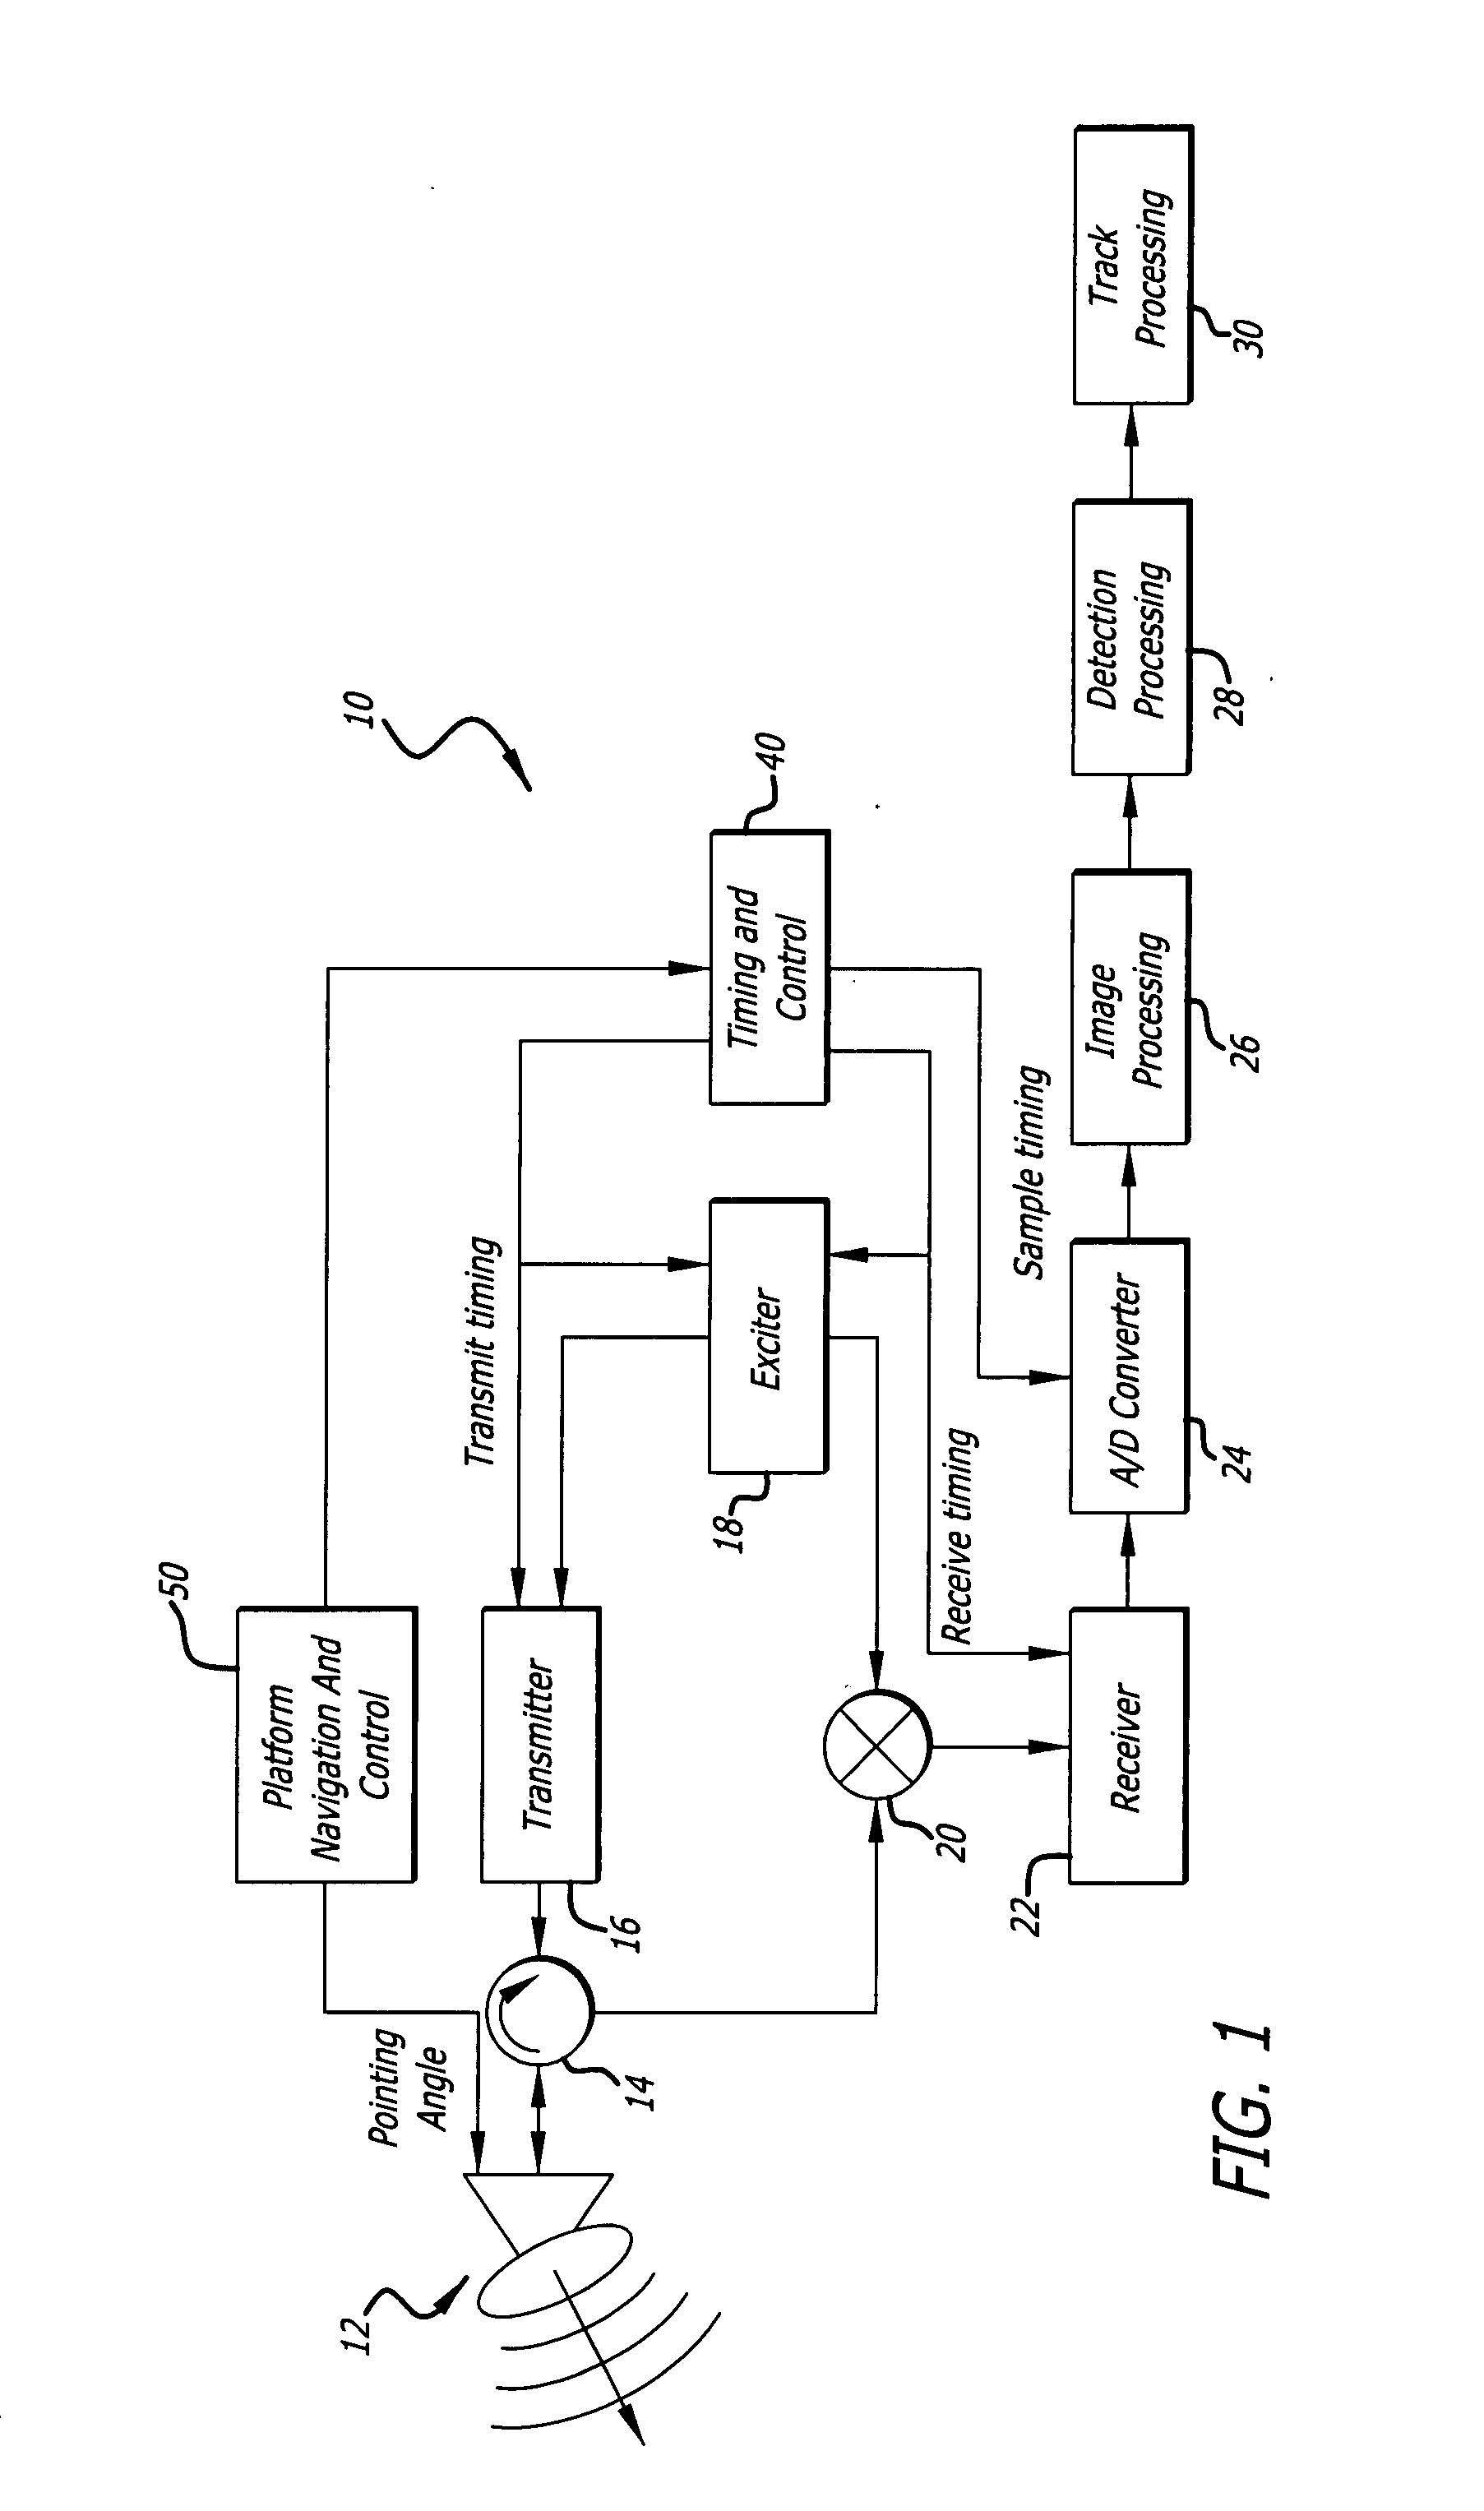 Radar imaging system and method using gradient magnitude second moment spatial variance detection